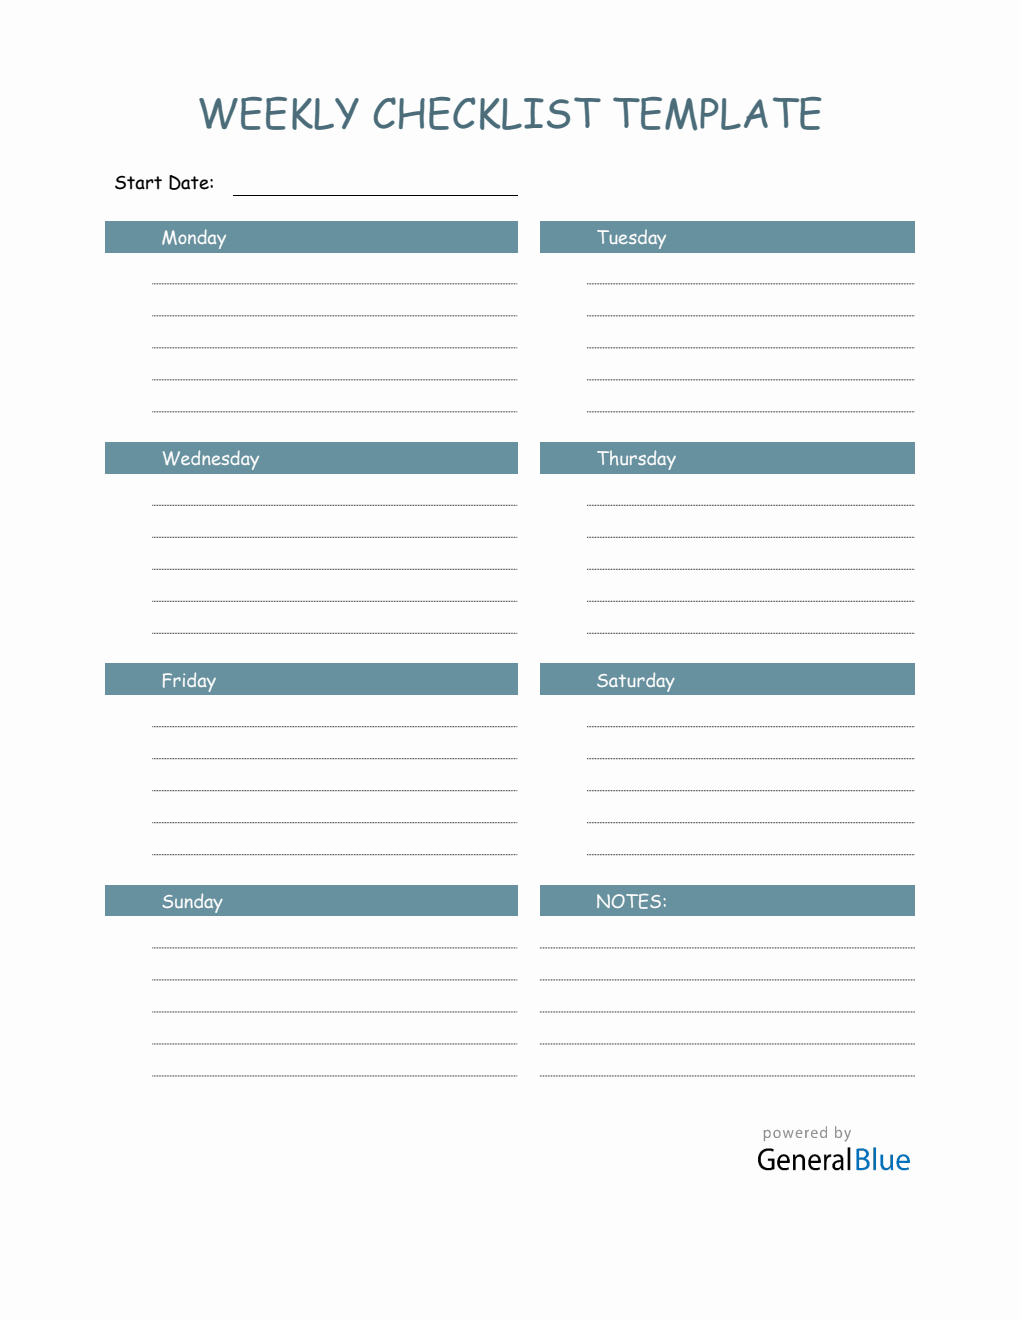 Weekly Checklist Template in PDF